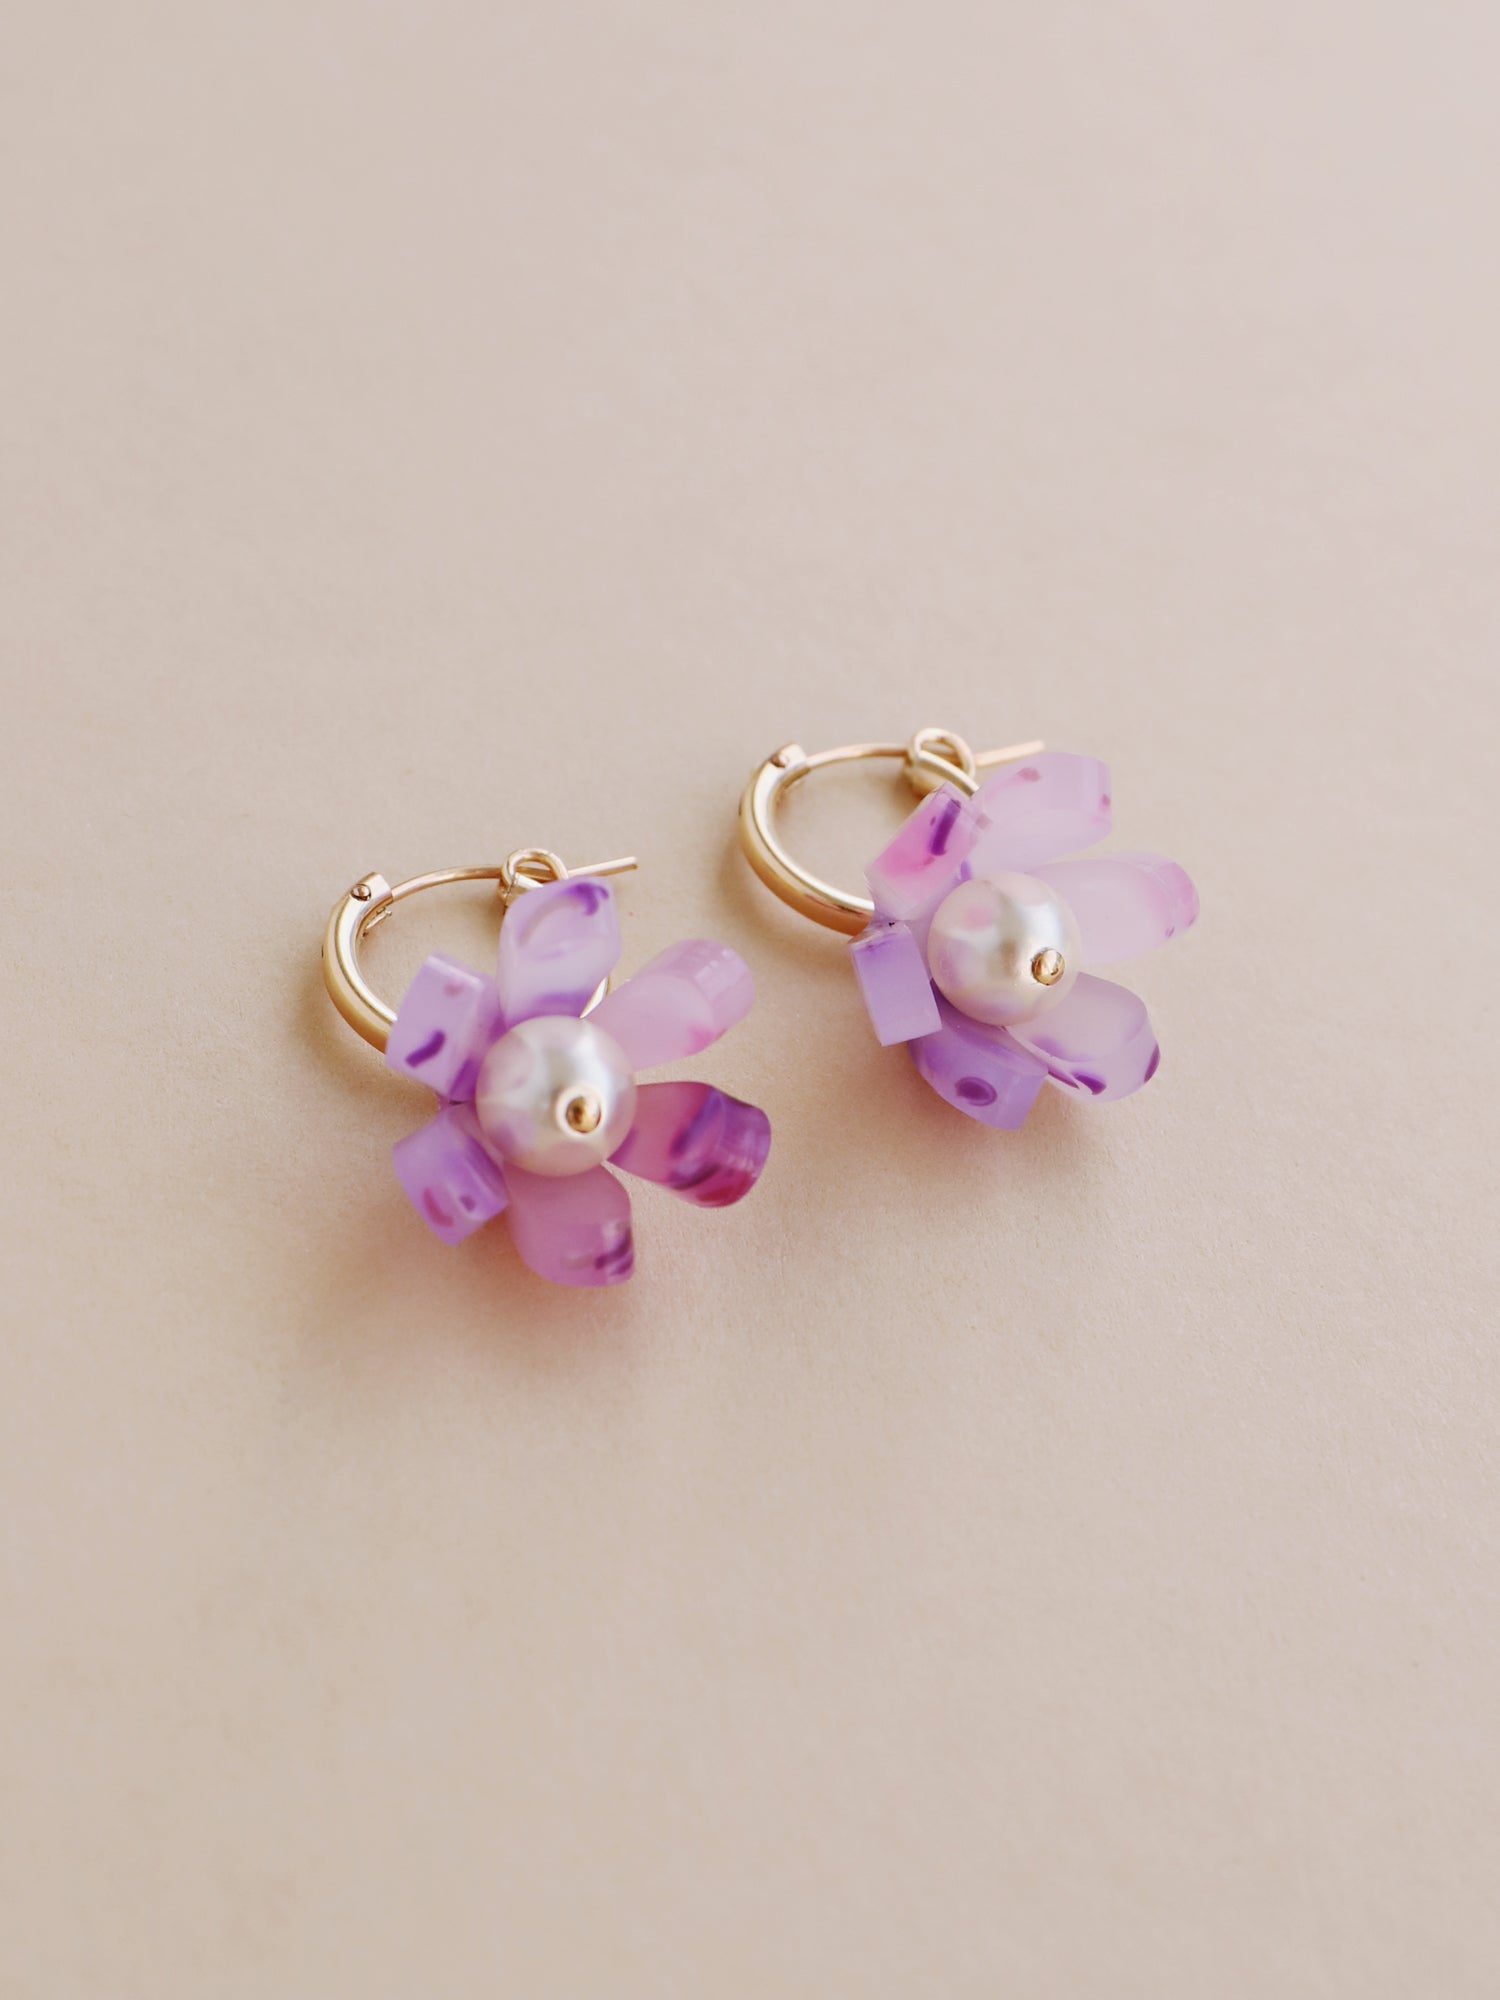 Purple, sculptural tulip hoop earrings. Made from heat-formed acrylic with high quality glass pearls and 14k gold-filled findings. Handmade in the UK by Wolf & Moon.